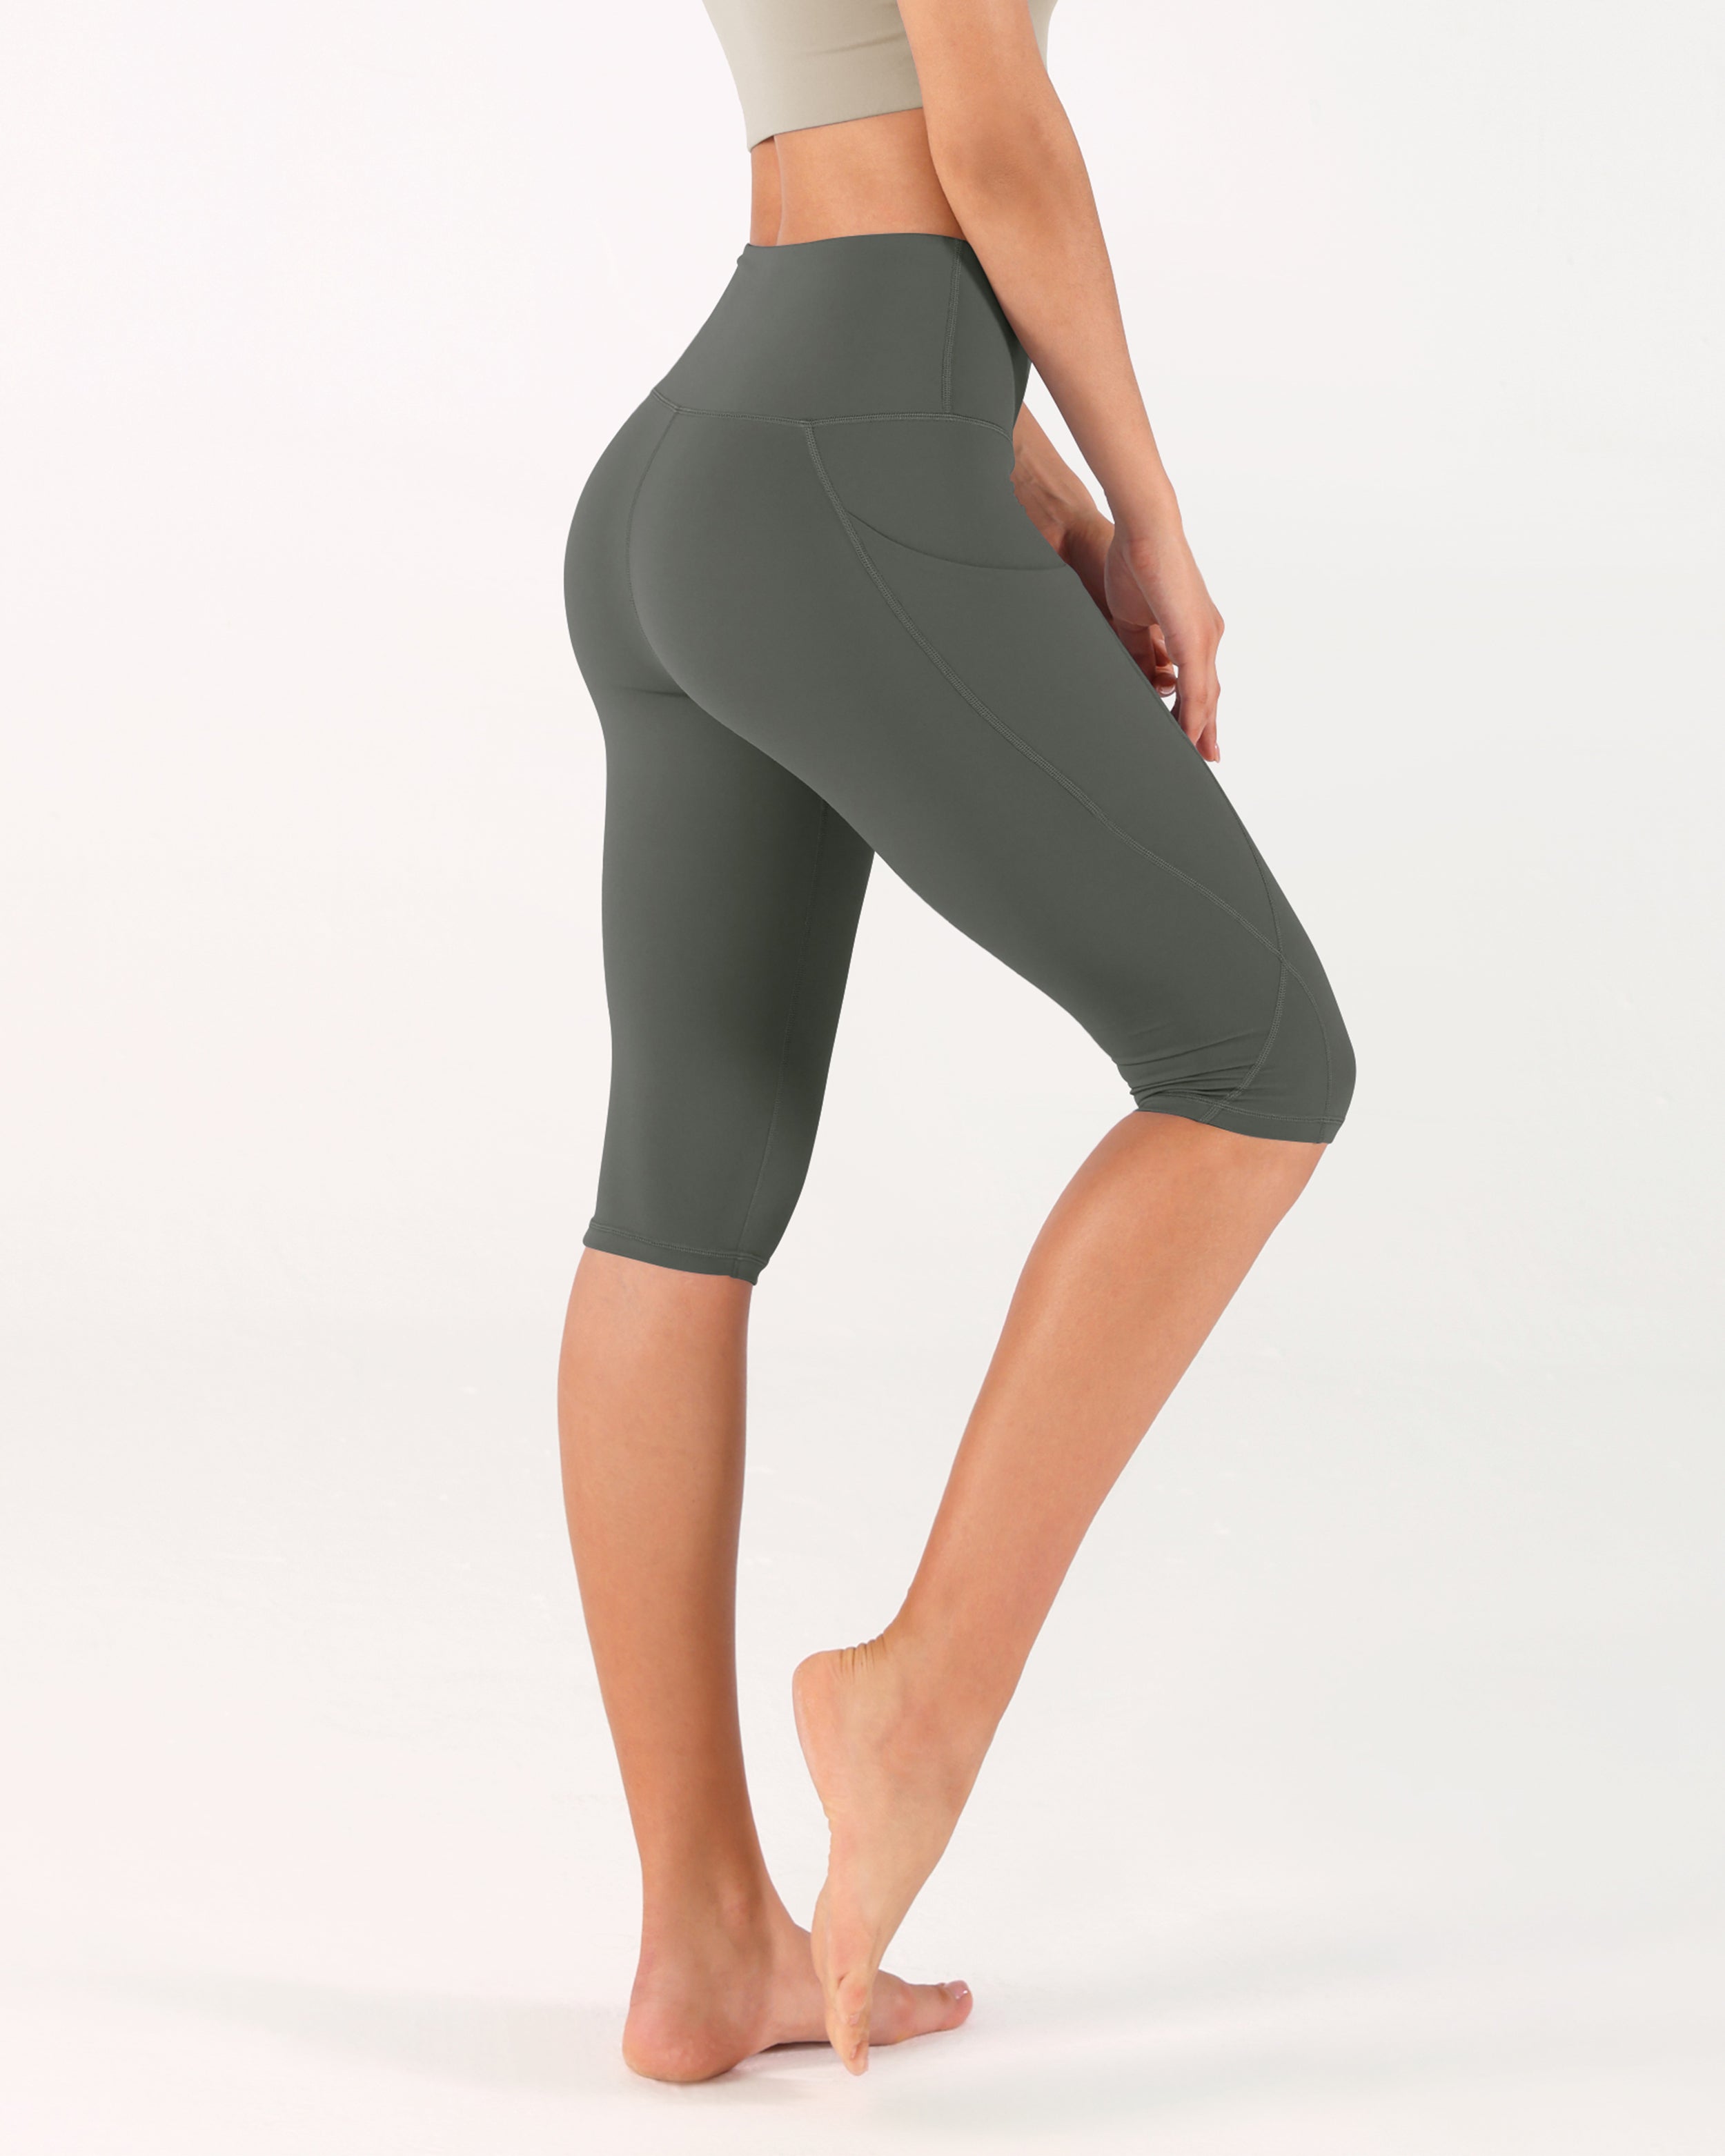 ODODOS High Waist Ruched Leggings for Women 25 / 28 Buttery Soft Crossover  Yoga Pants, Shaker Beige, L : Buy Online at Best Price in KSA - Souq is now  : Fashion